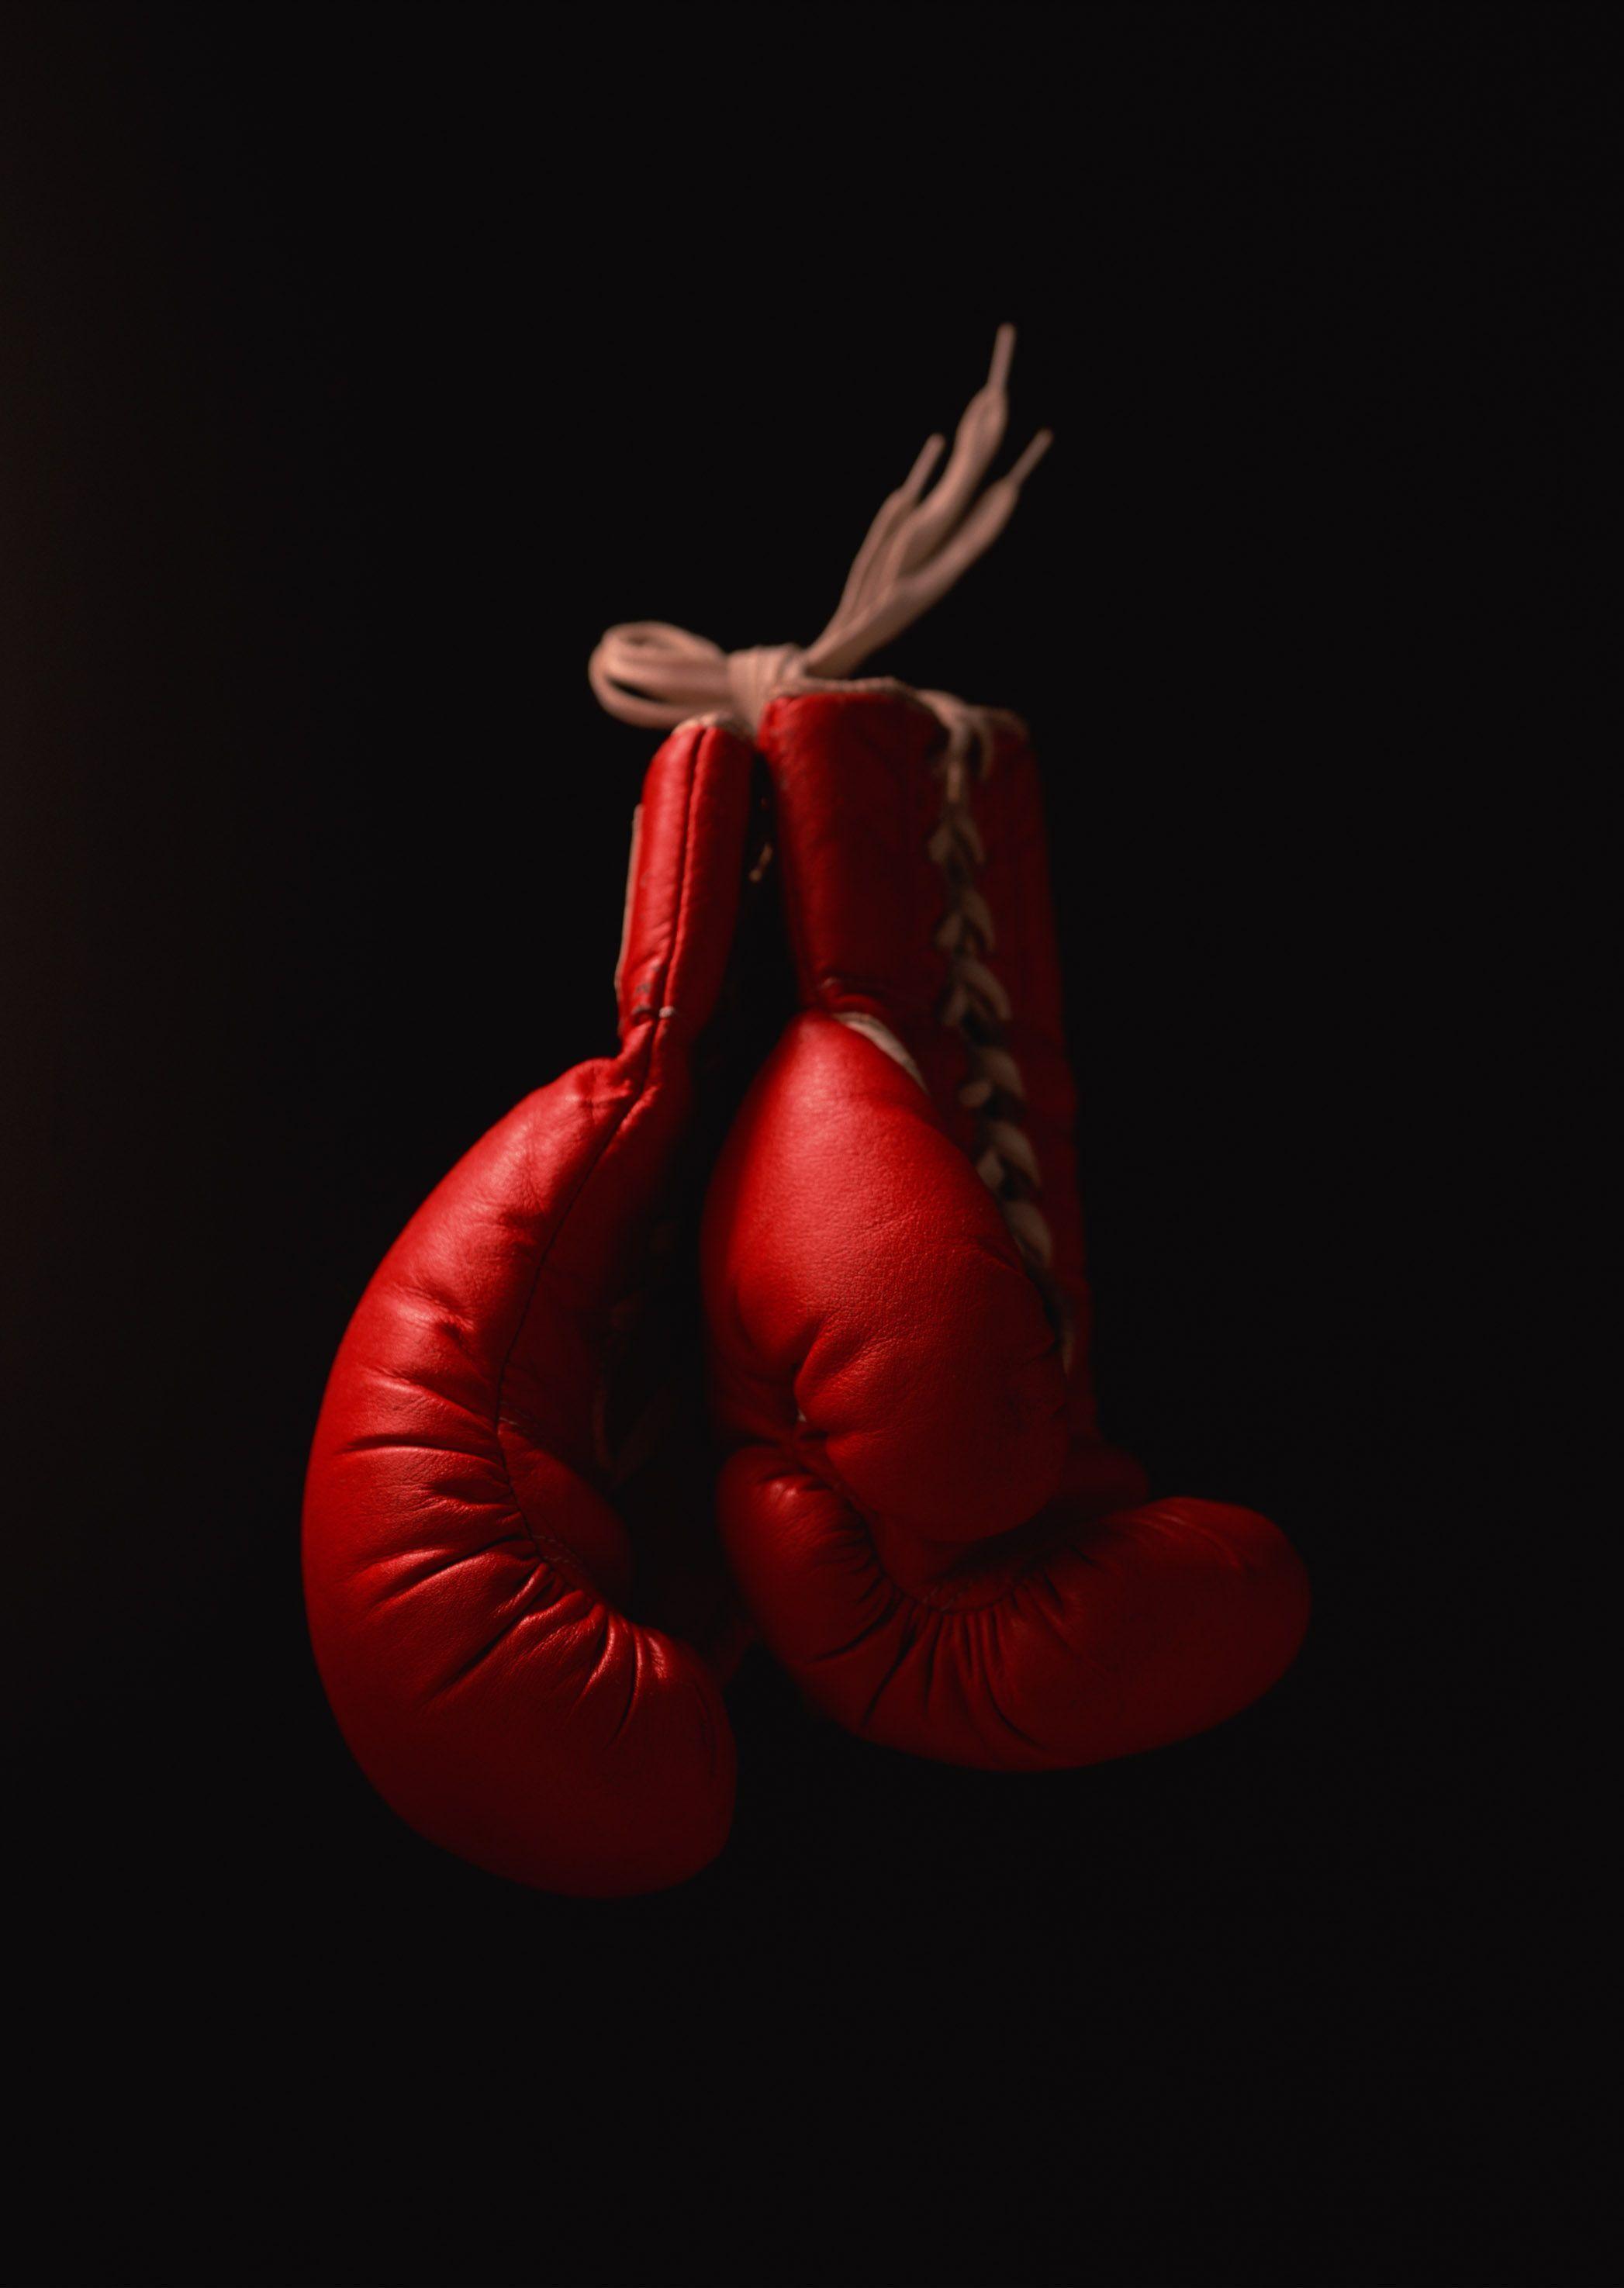 500 Boxing Pictures HD  Download Free Images on Unsplash